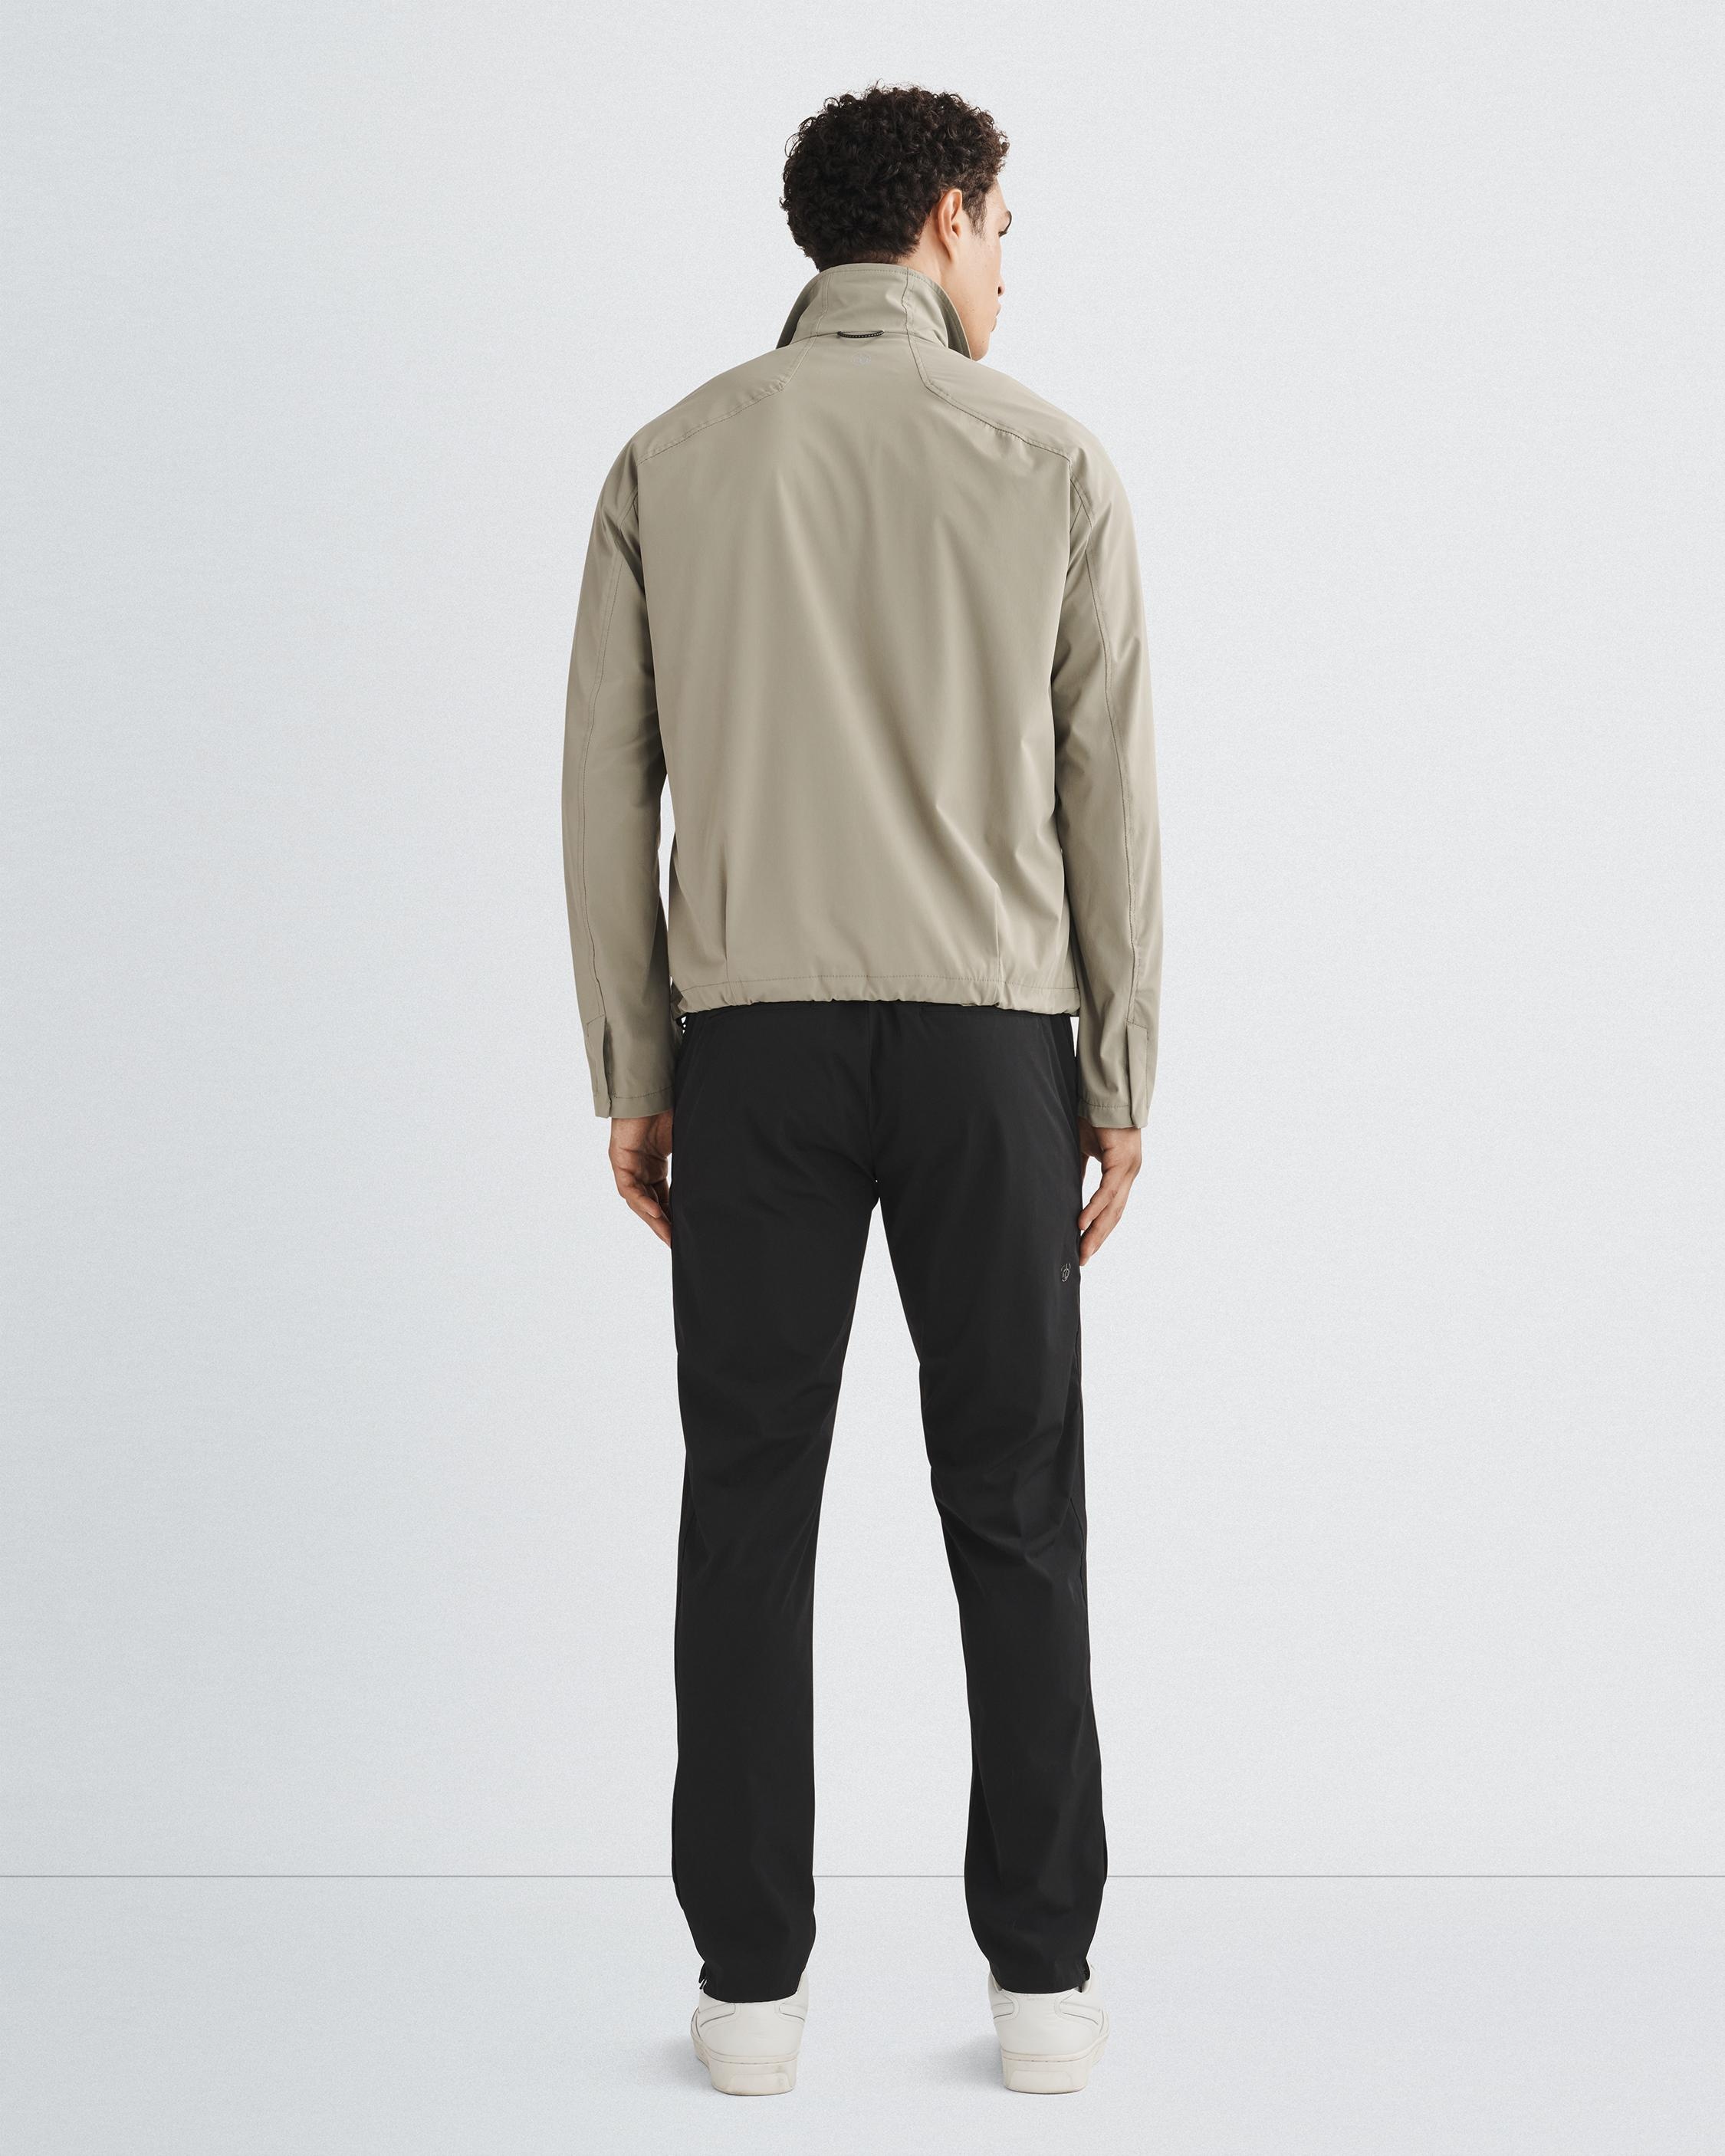 Pursuit Grant Technical Jacket
Relaxed Fit Jacket - 5